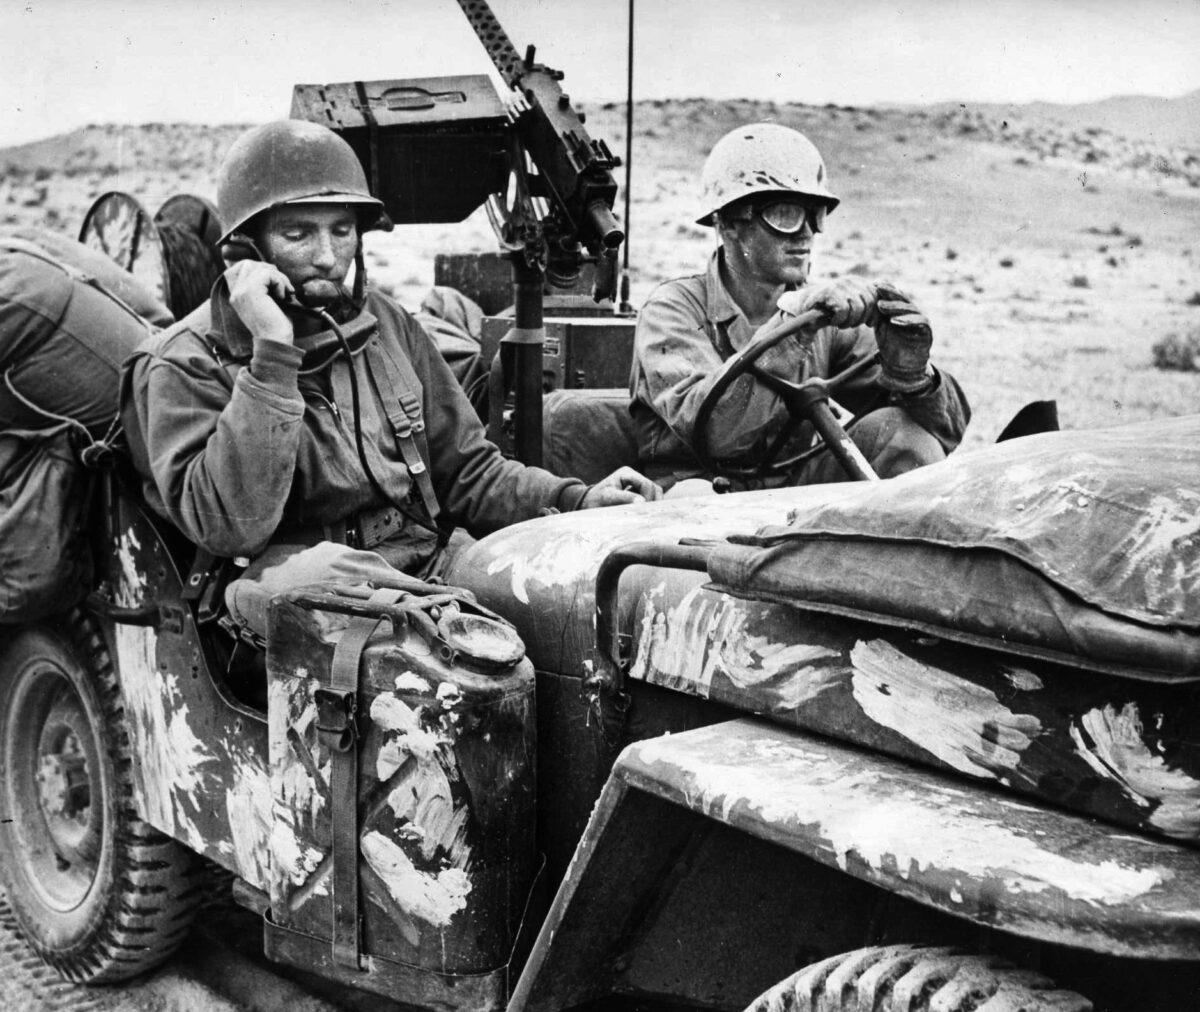 U.S. soldiers travelling by jeep pause near El Guettar to report on potential enemy targets. Company B’s attached reconnaissance platoon scouted ahead, followed by a heavy platoon. 